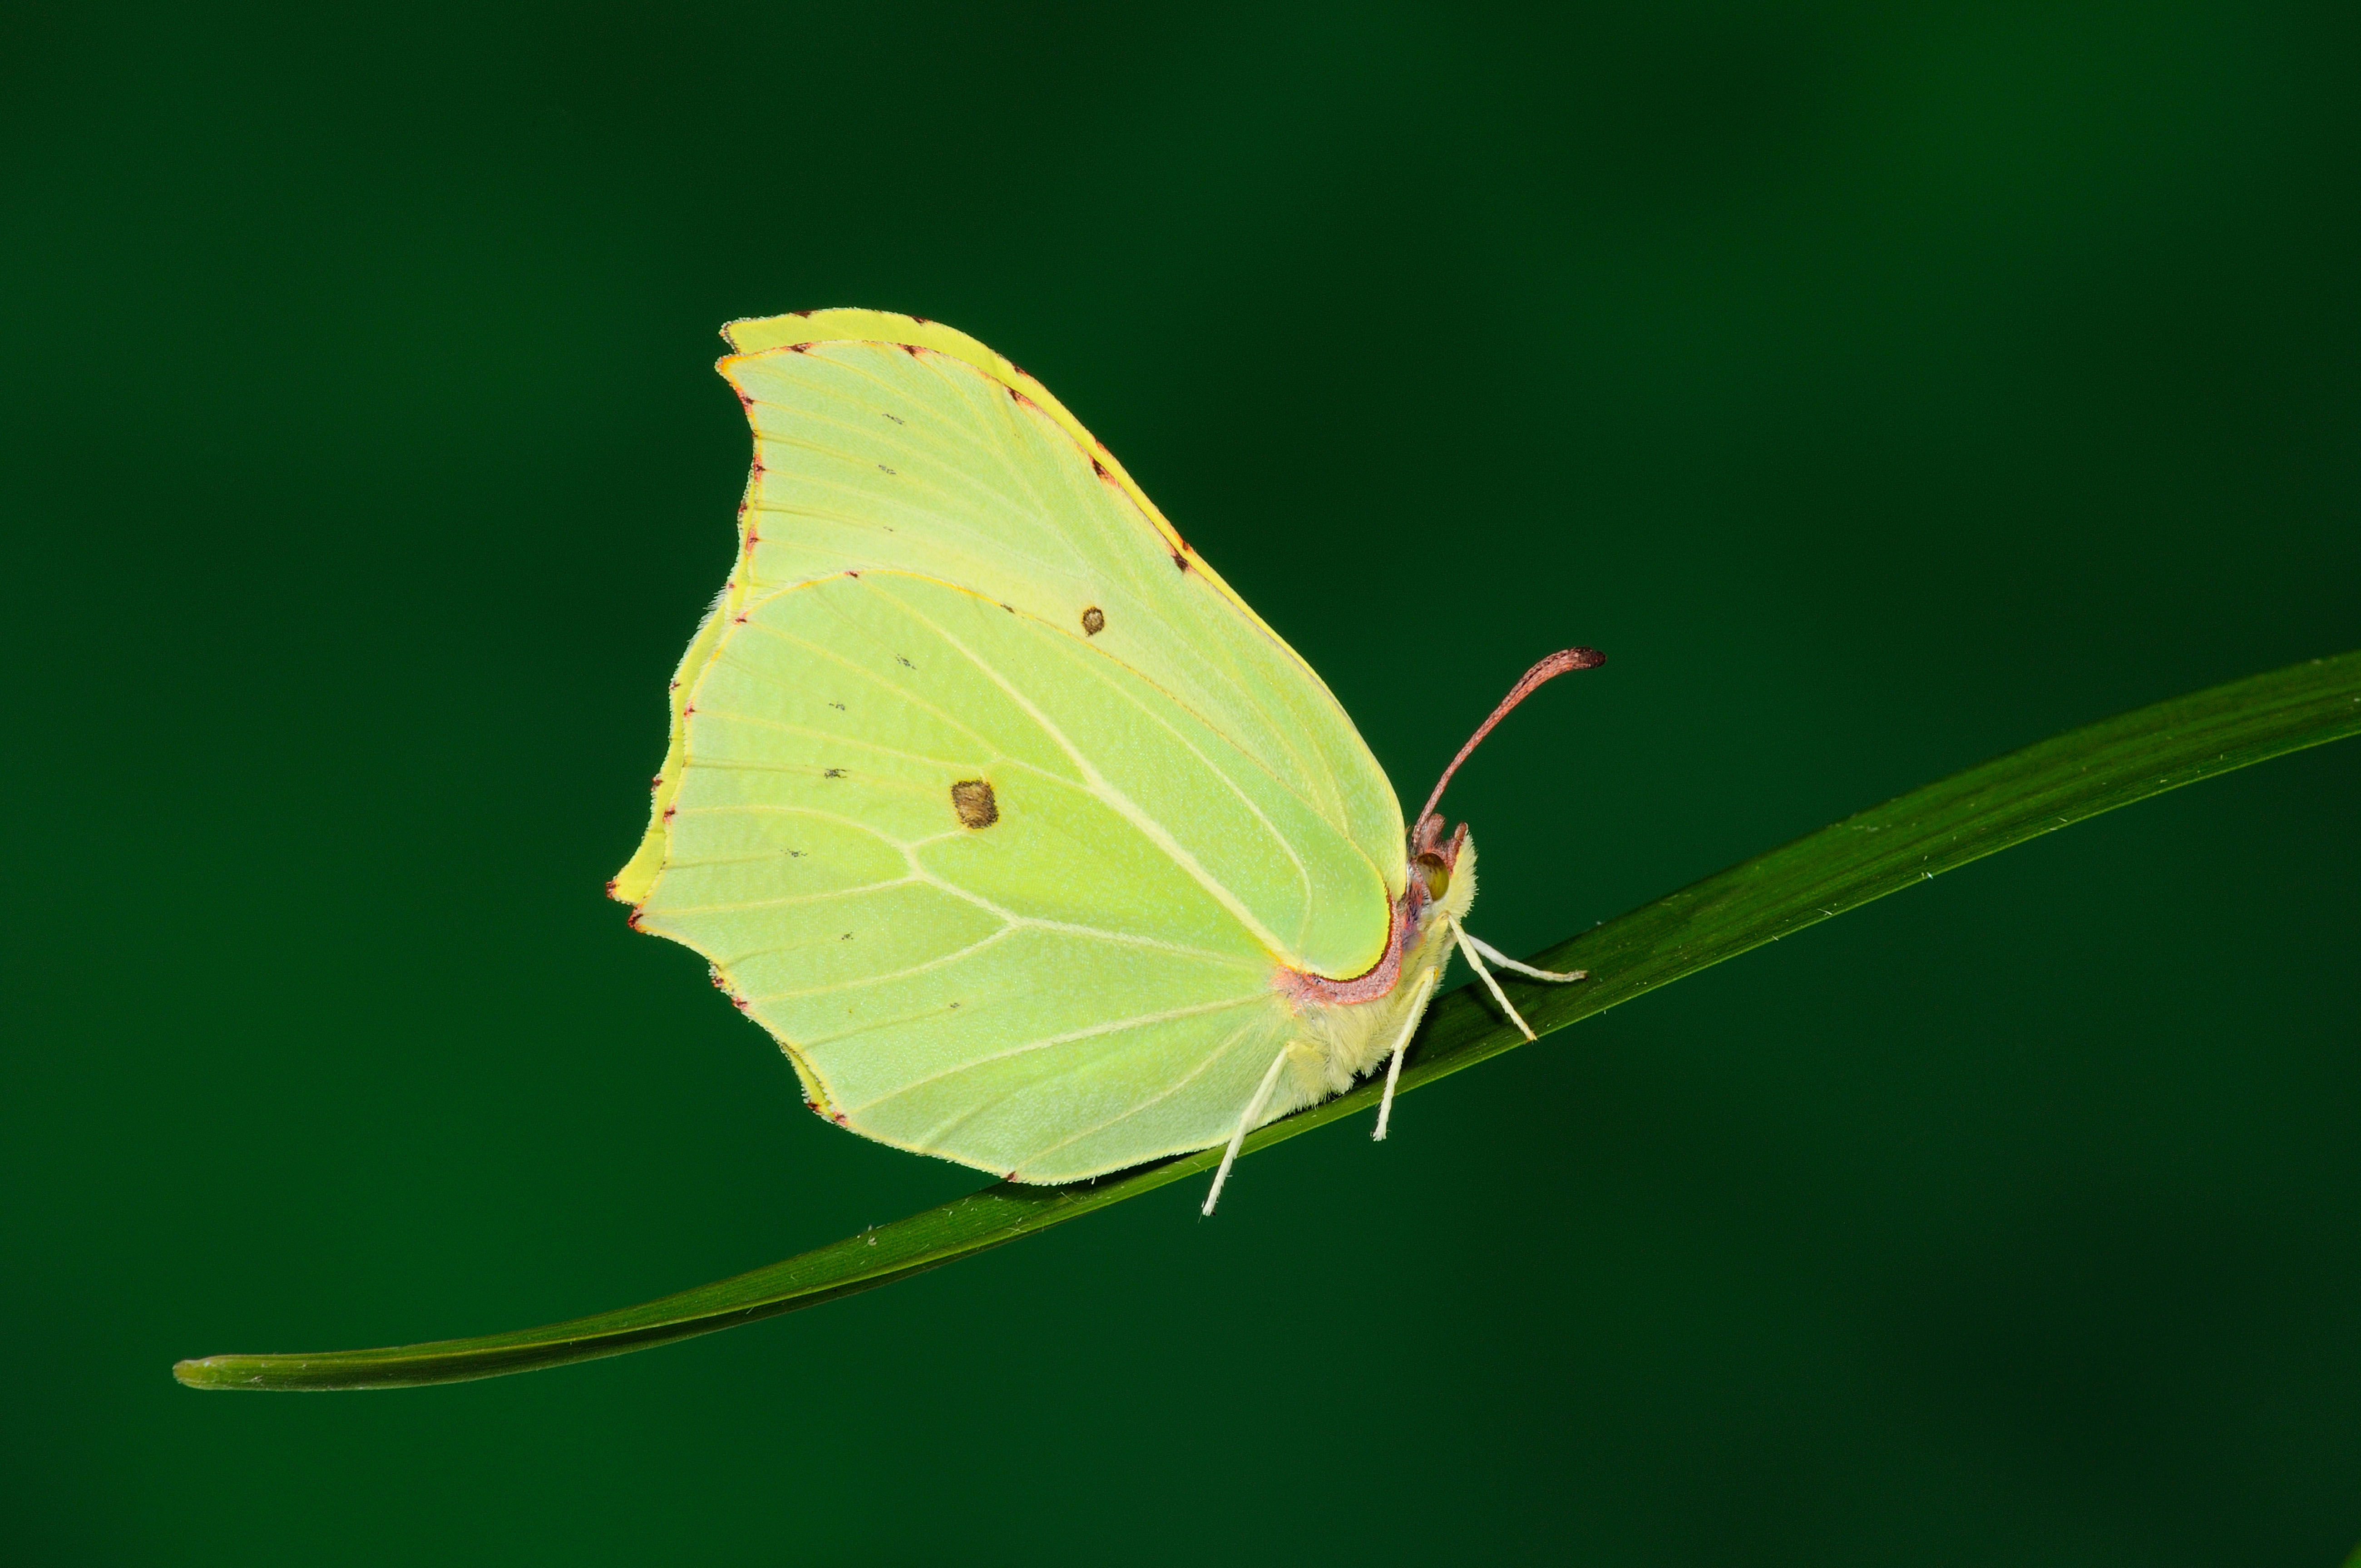 A brimstone butterfly at rest on blade of grass (Alamy/PA)